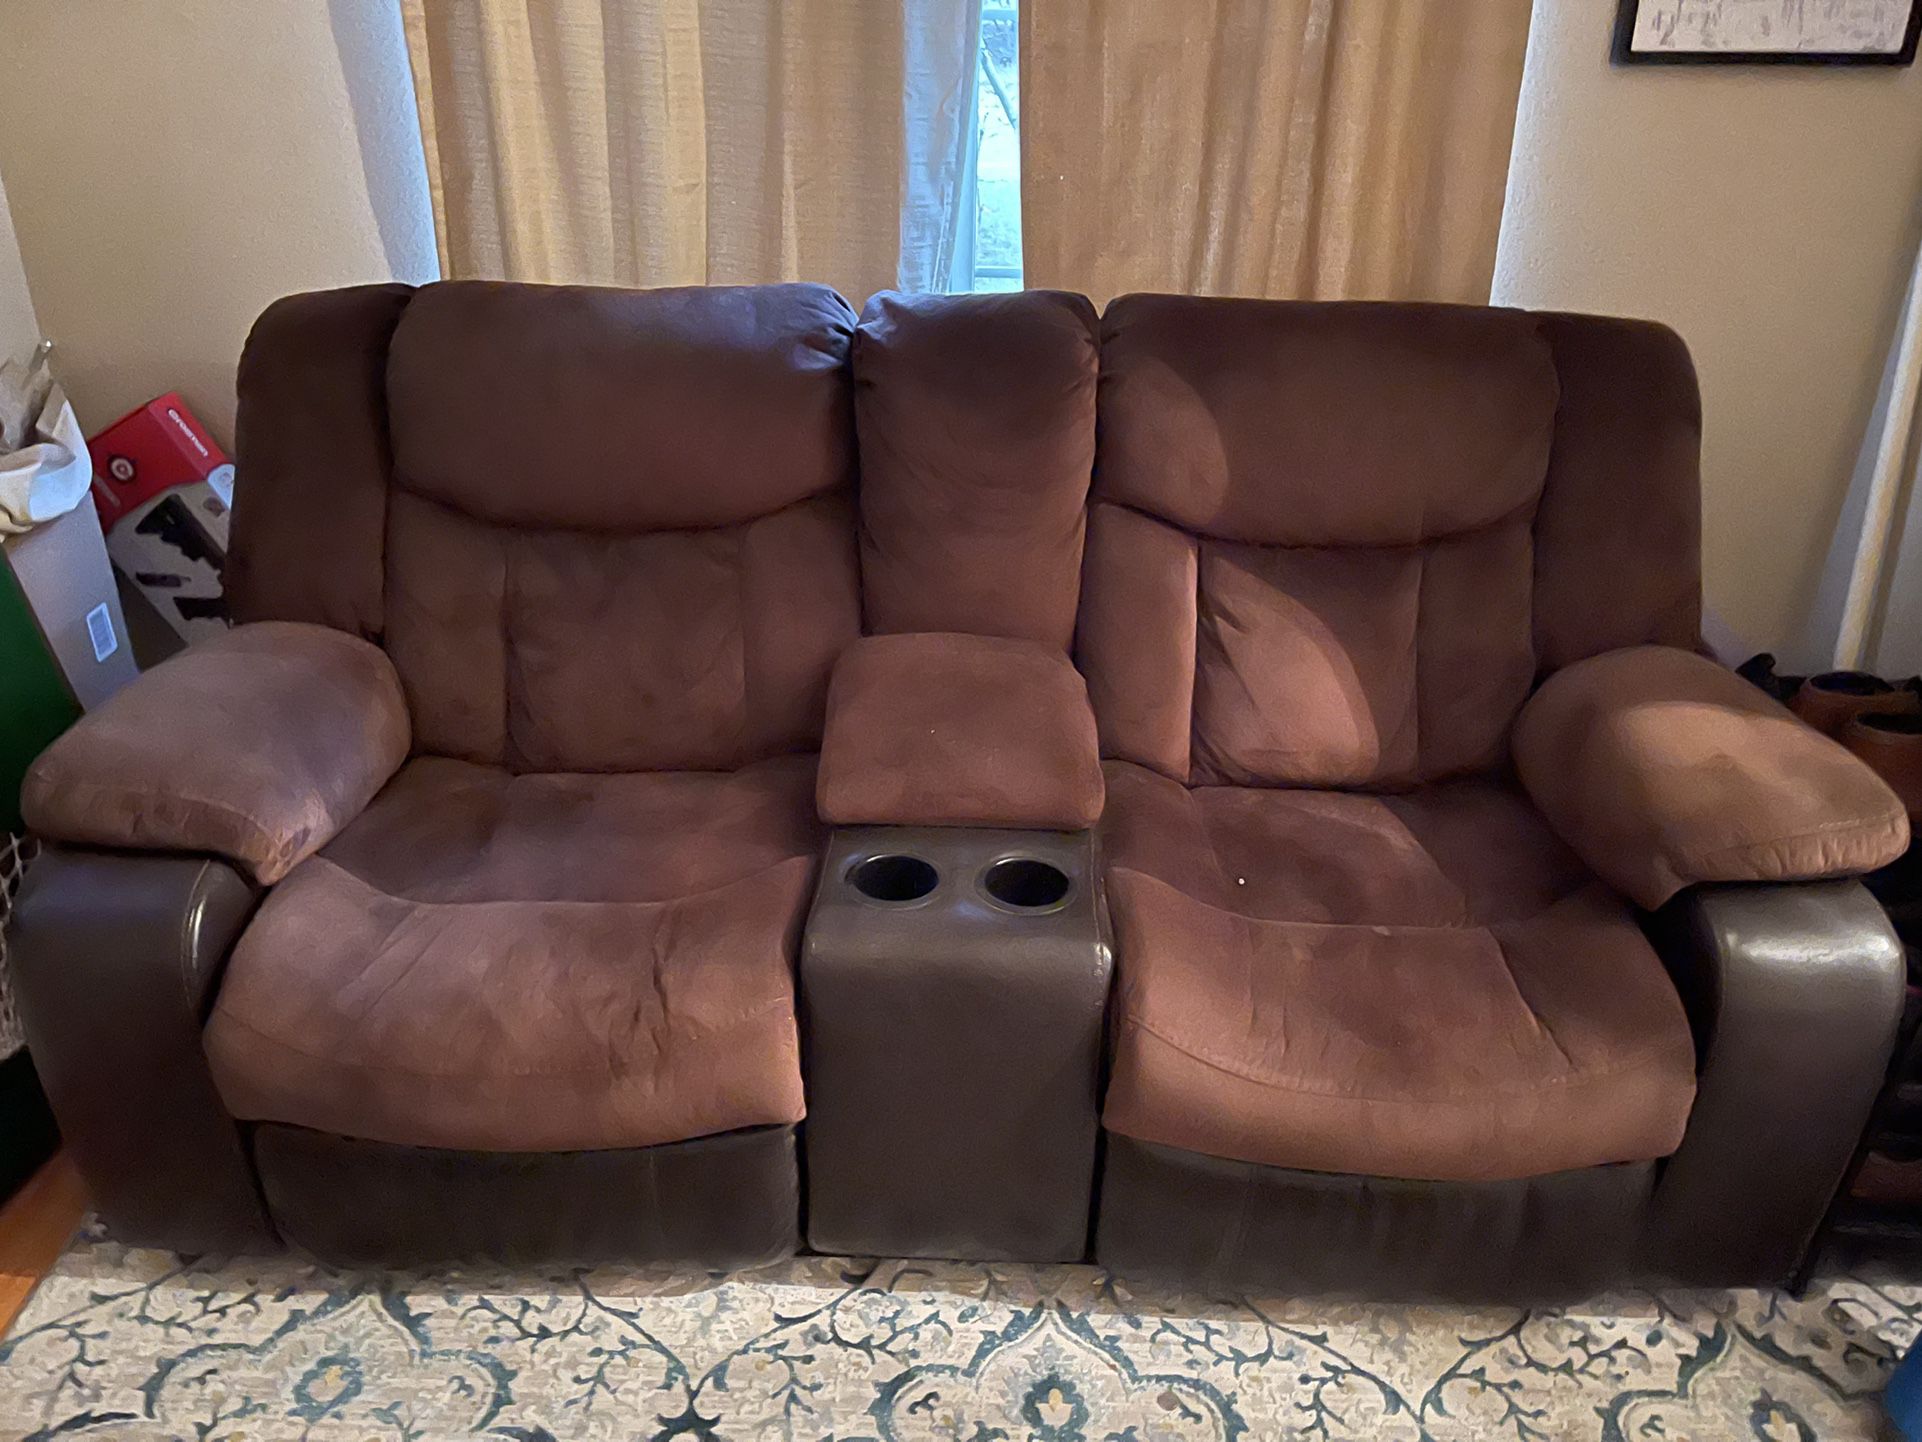 Leather/Suade Two Seat Recliner Couch